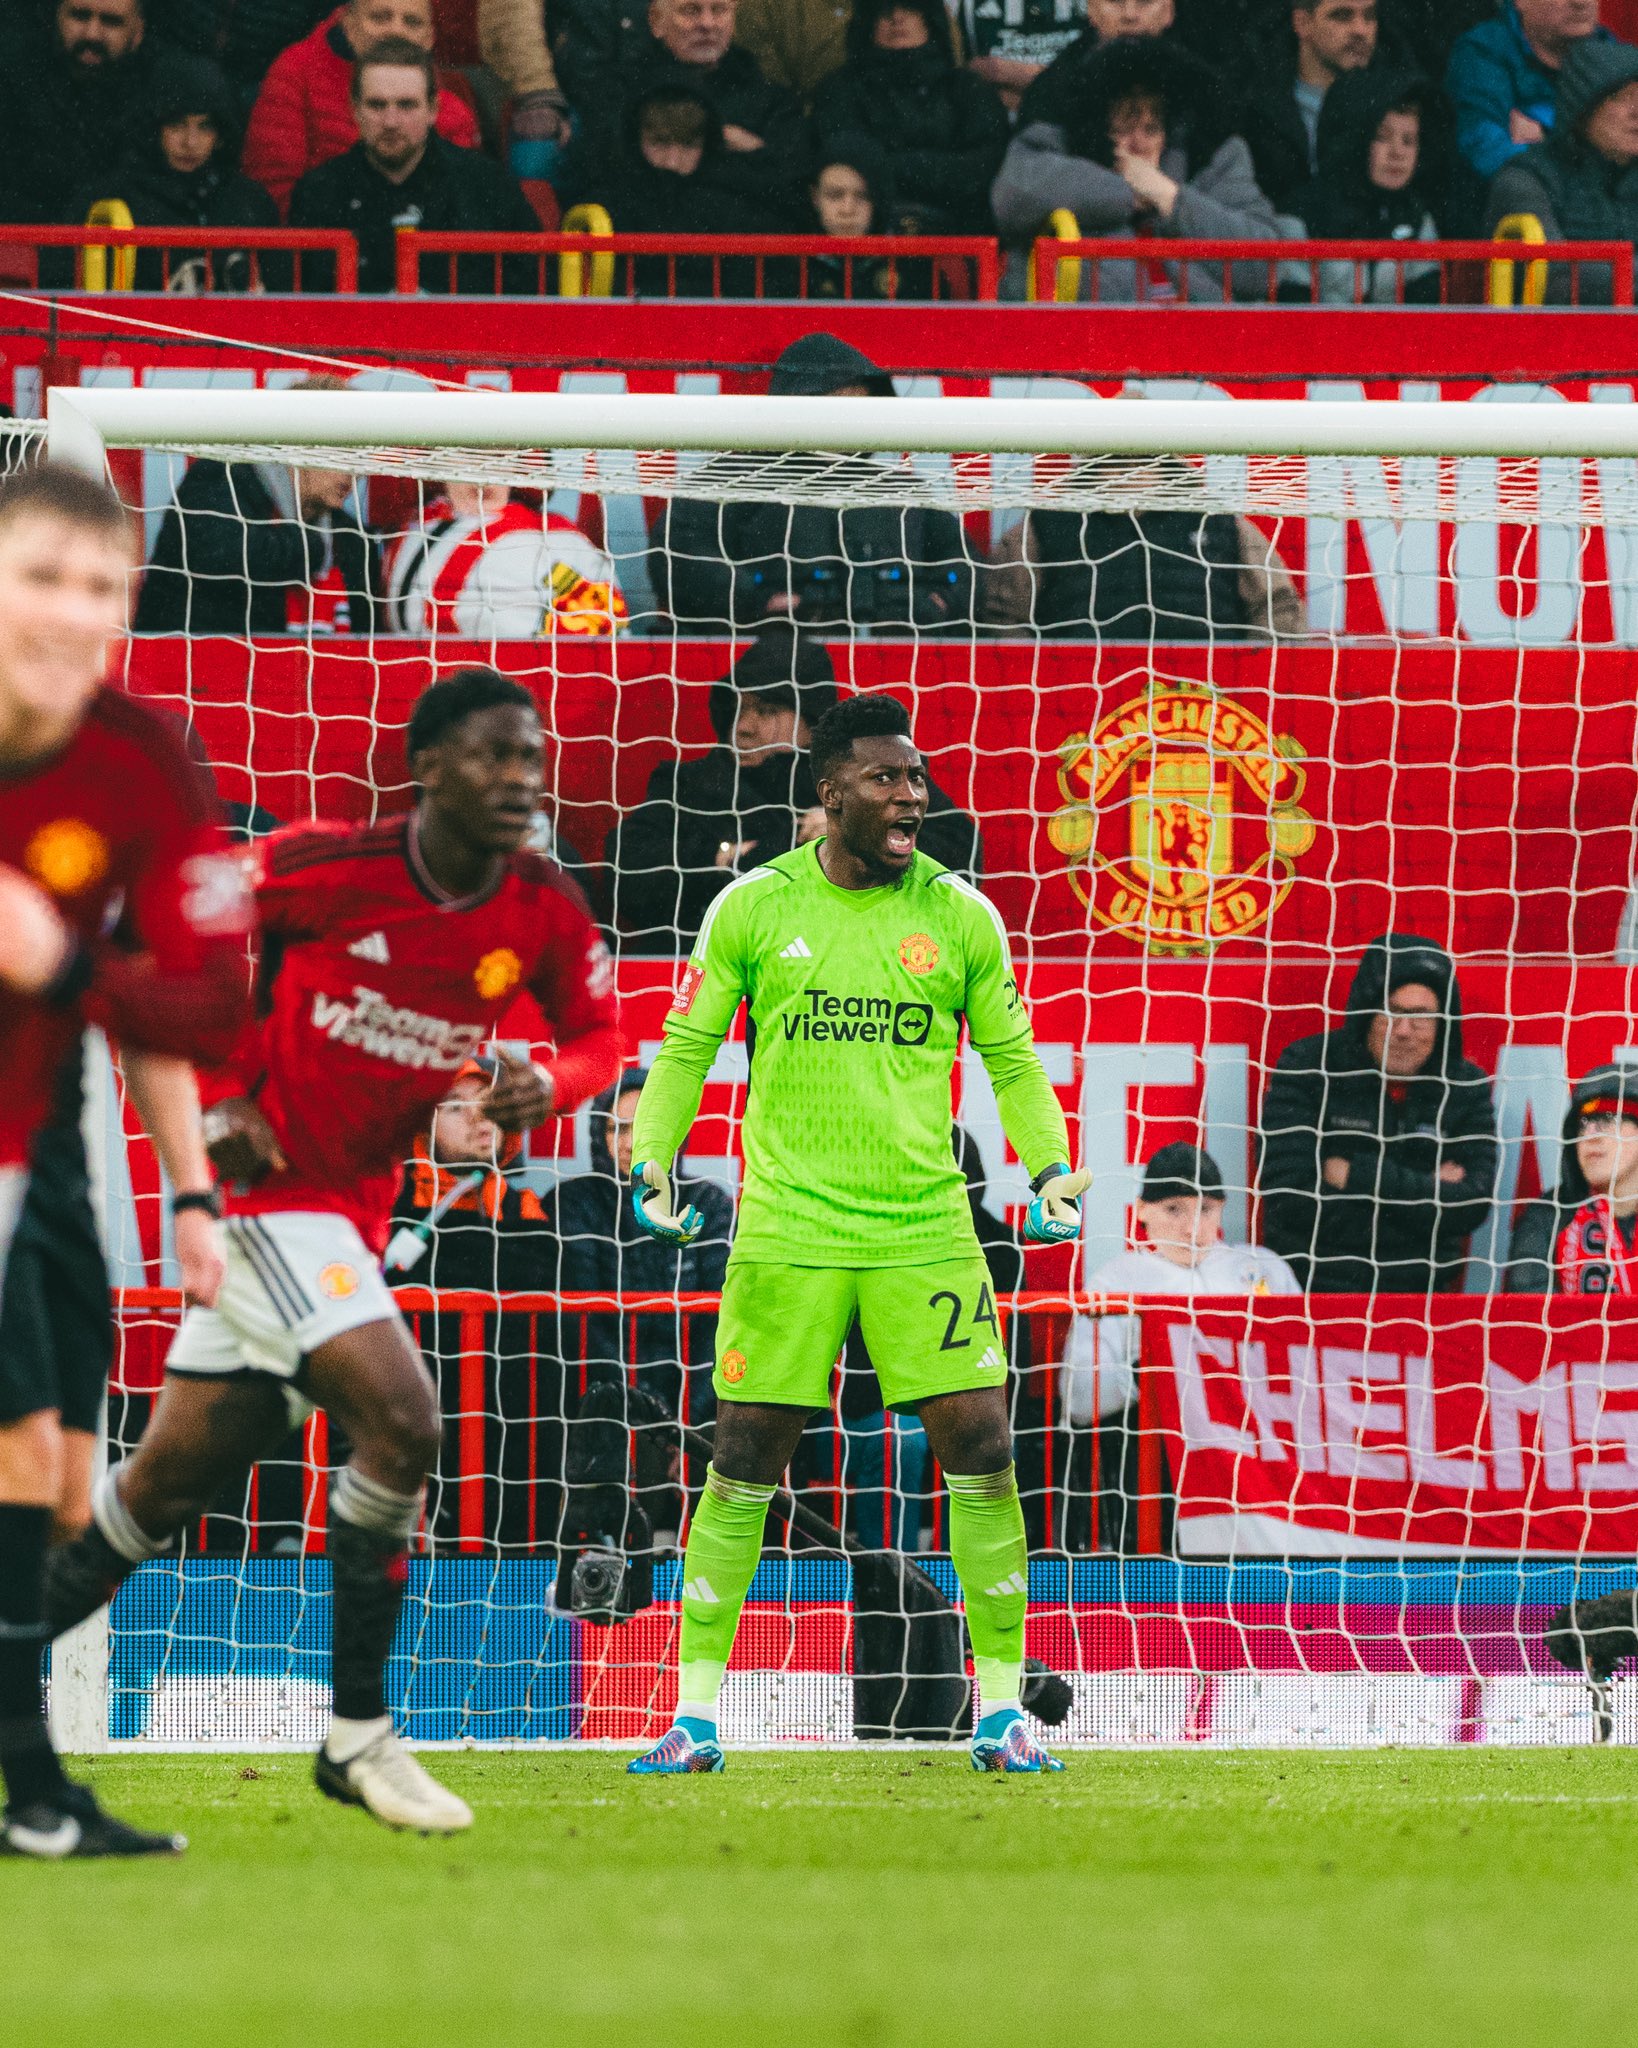 Andre Onana on X: "We're Man United and we are never gonna stop. Next stop,  Wembley. https://t.co/STcIRmoDUf" / X